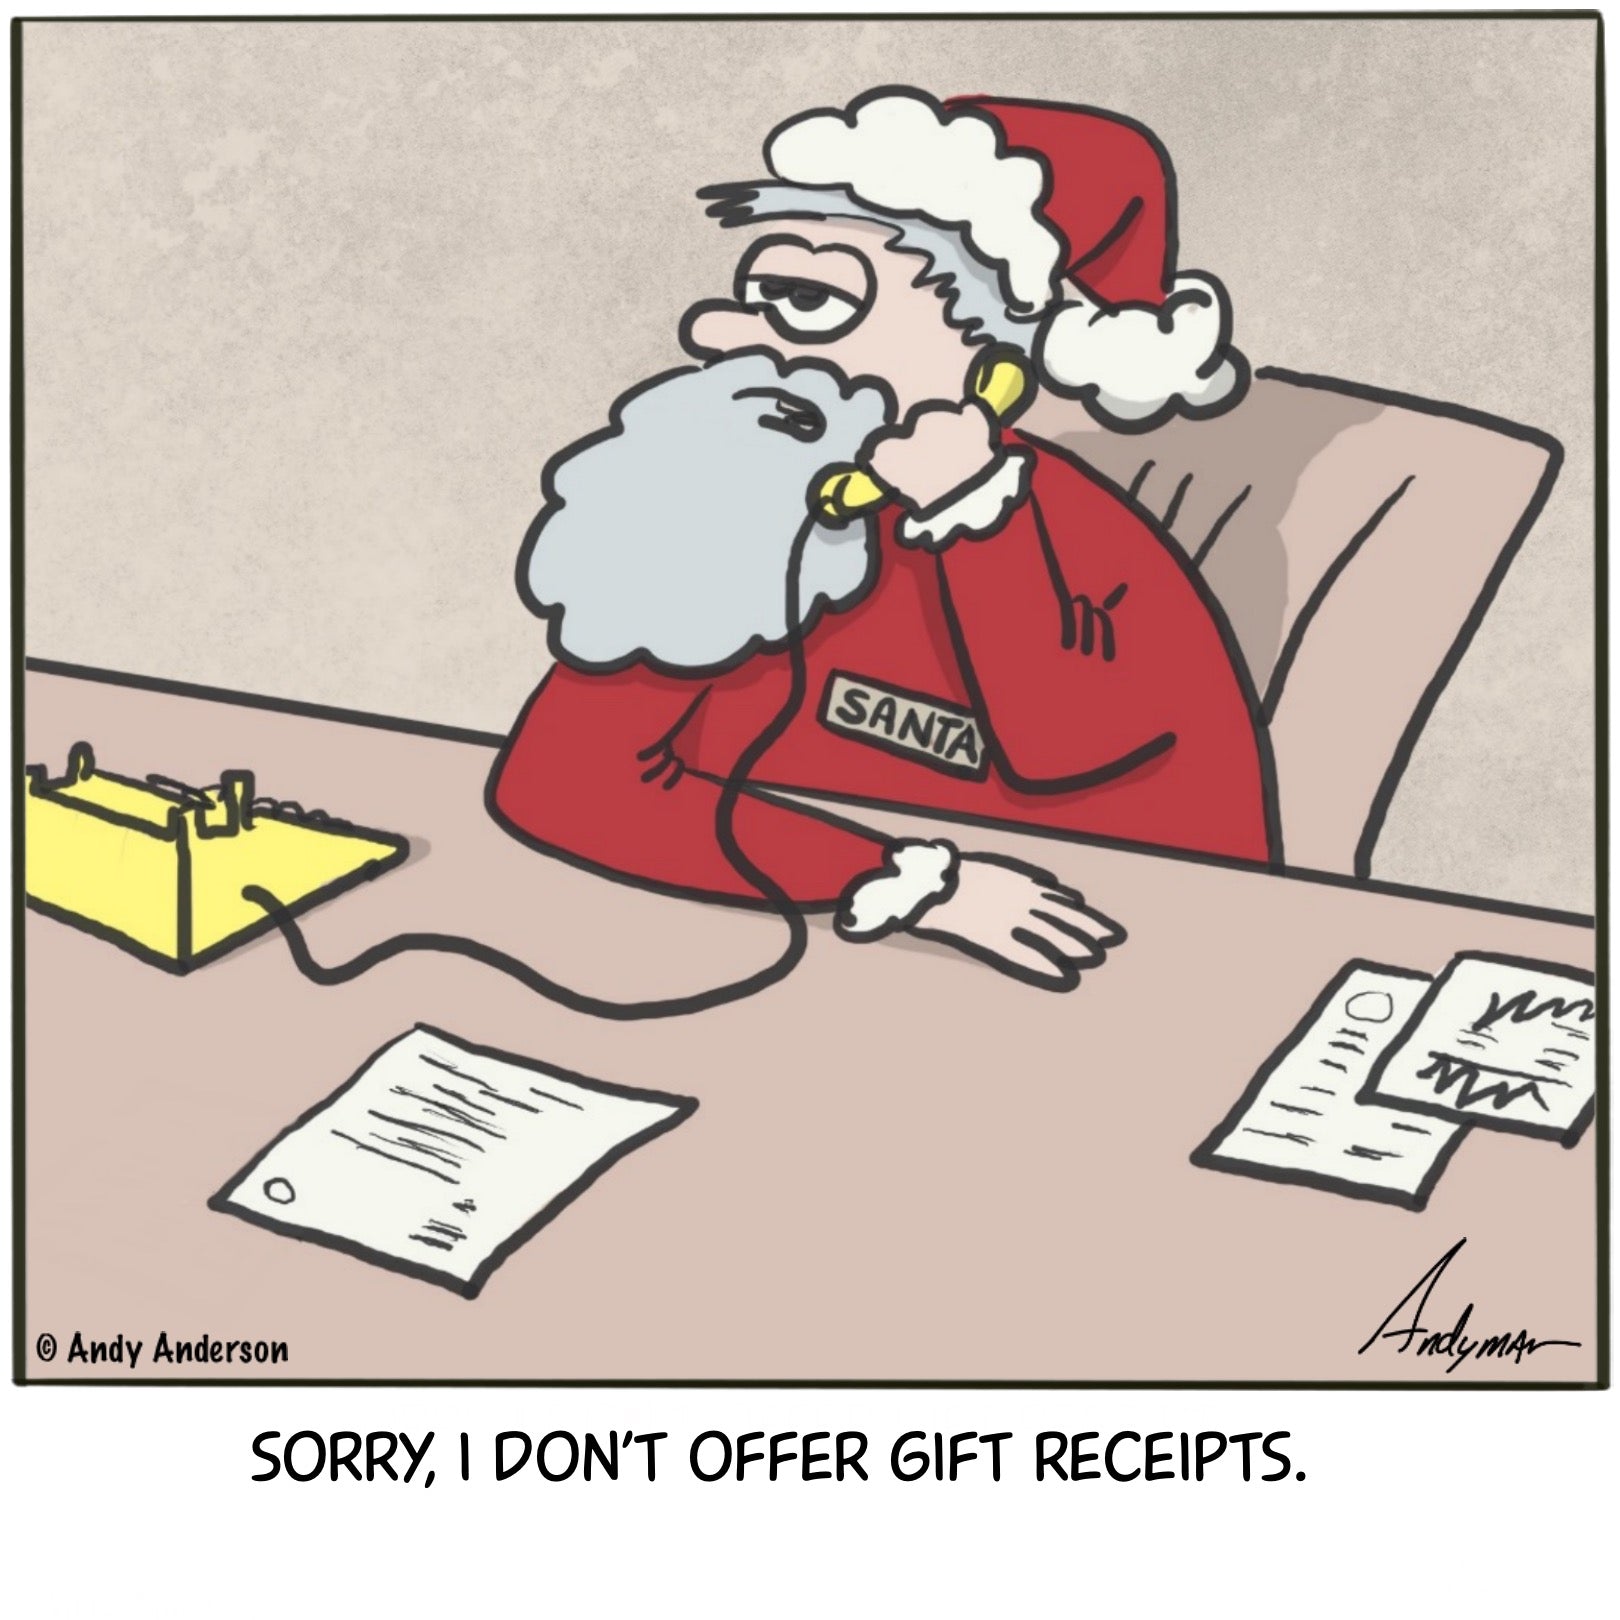 Cartoon about Santa not offering gift receipts by Andy Anderson